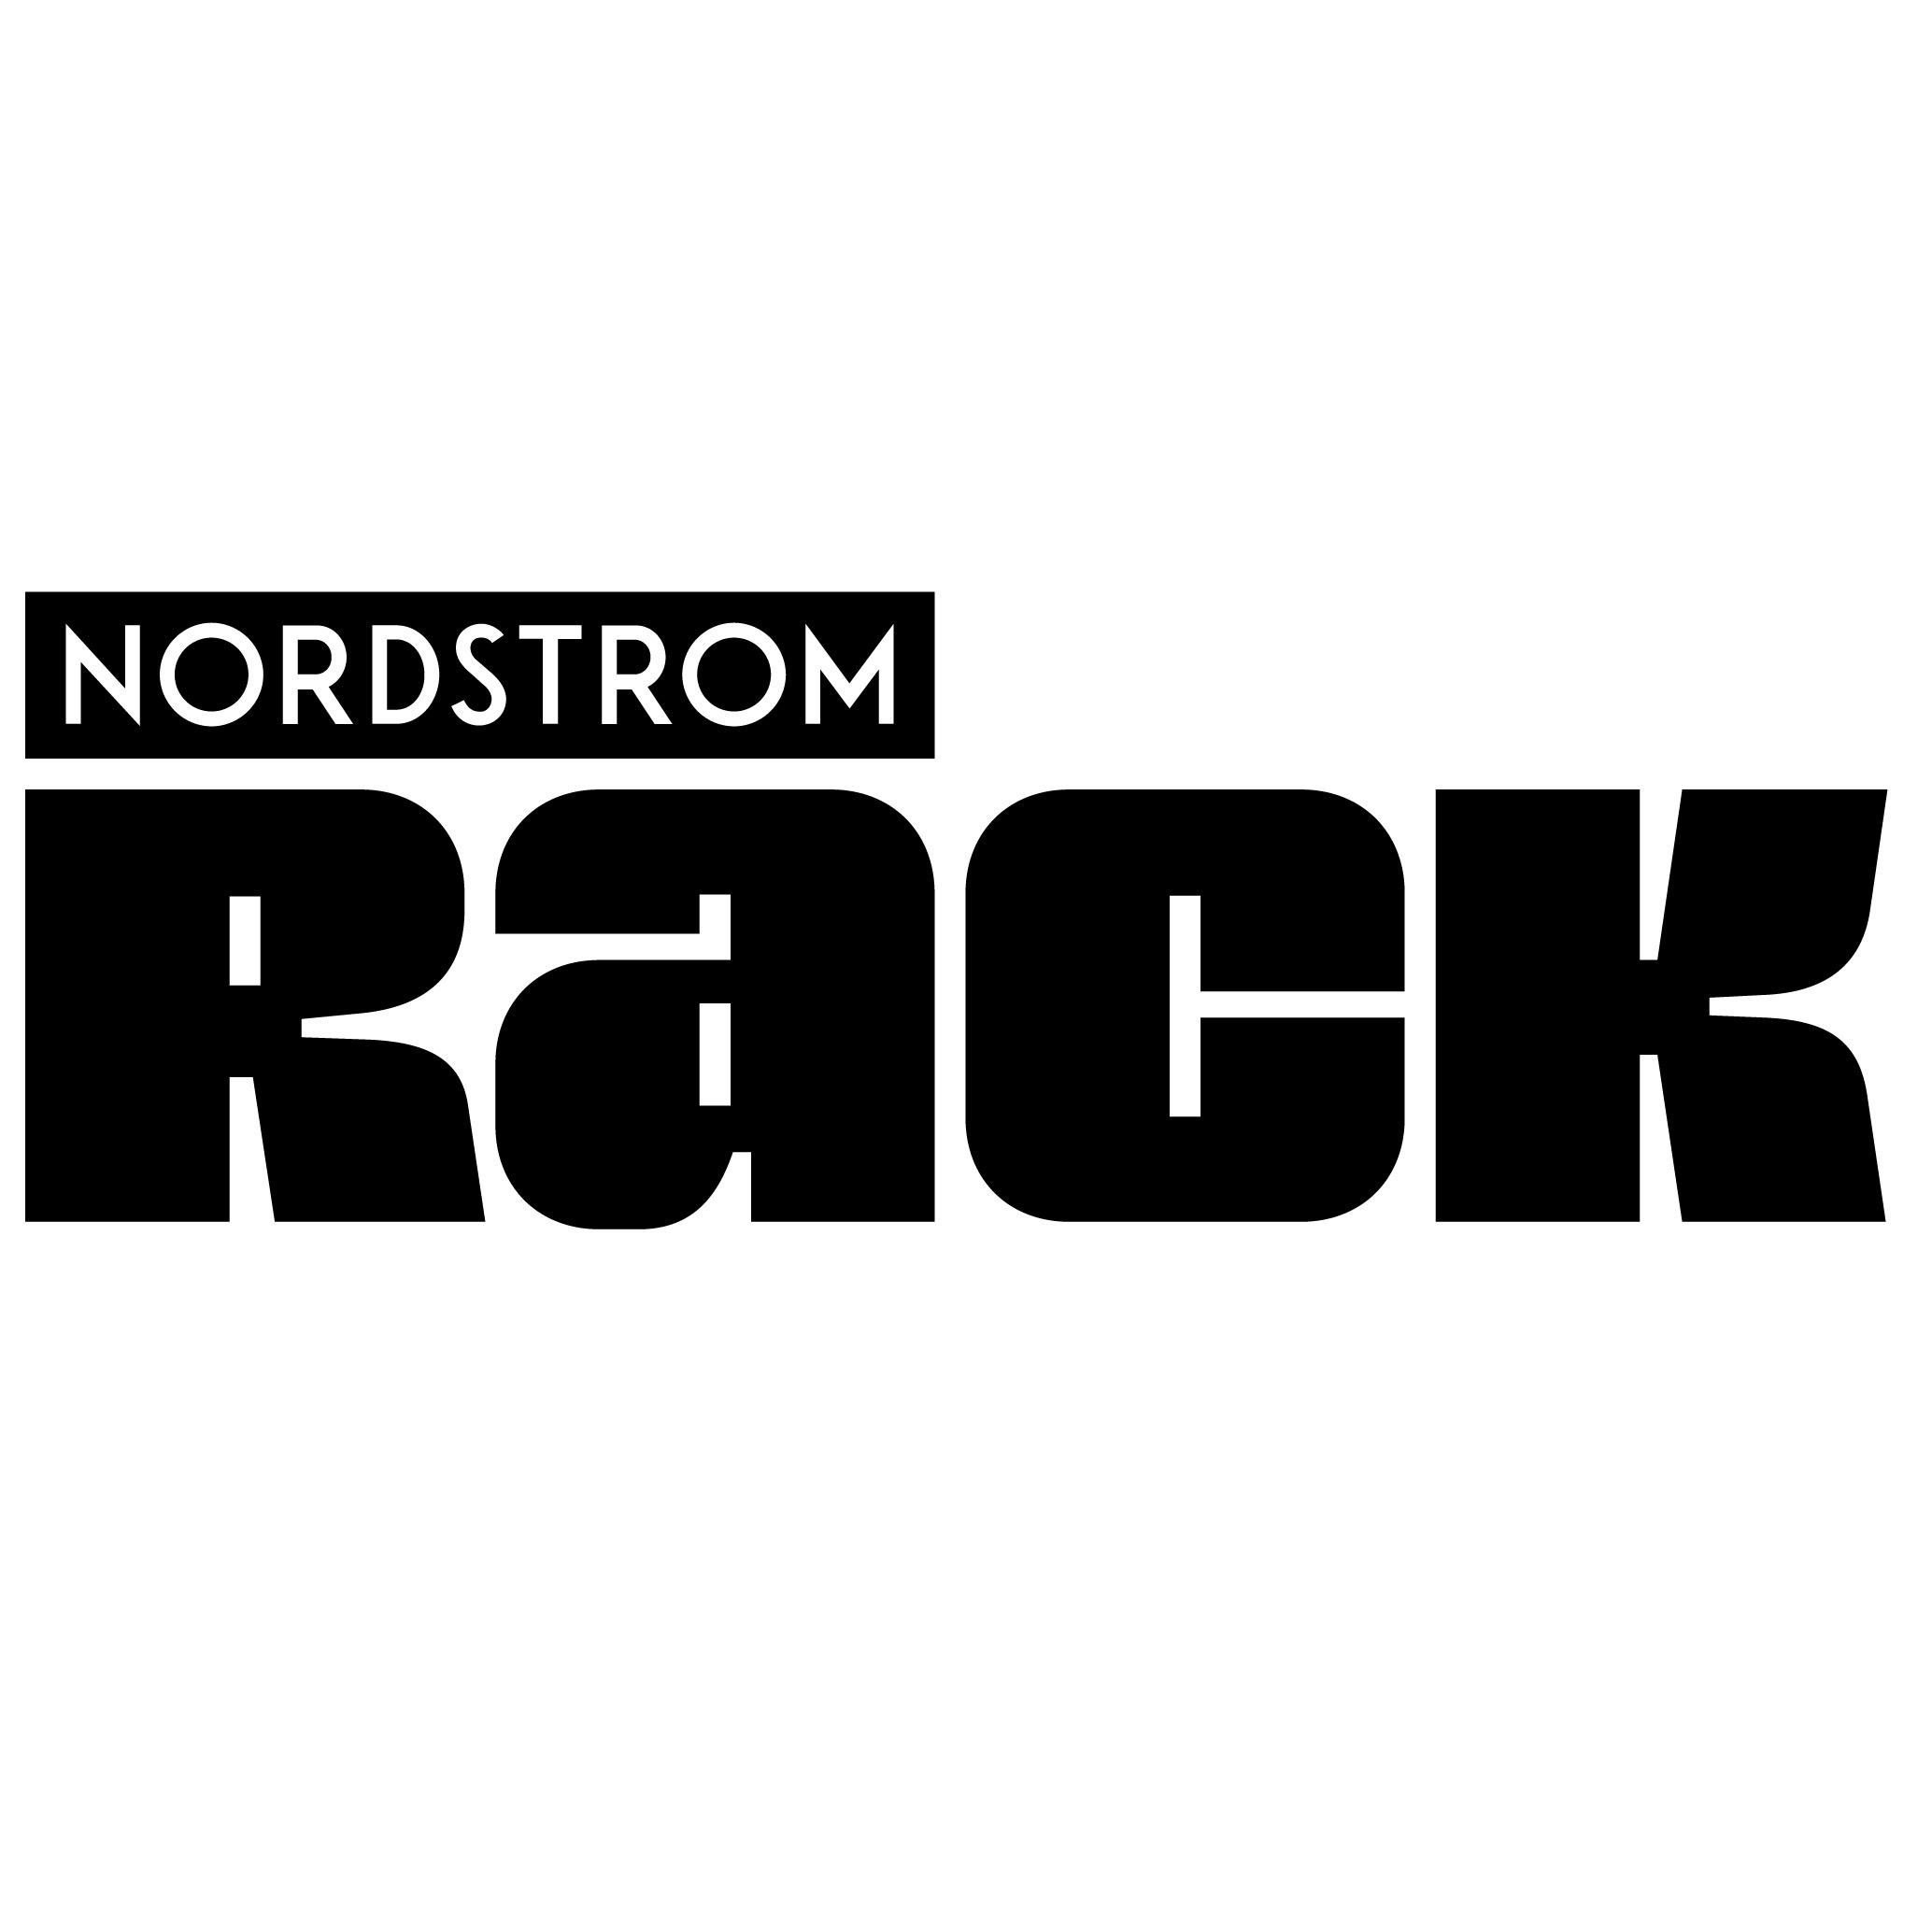 Nordstrom Rack at San Clemente Plaza - COMING SOON